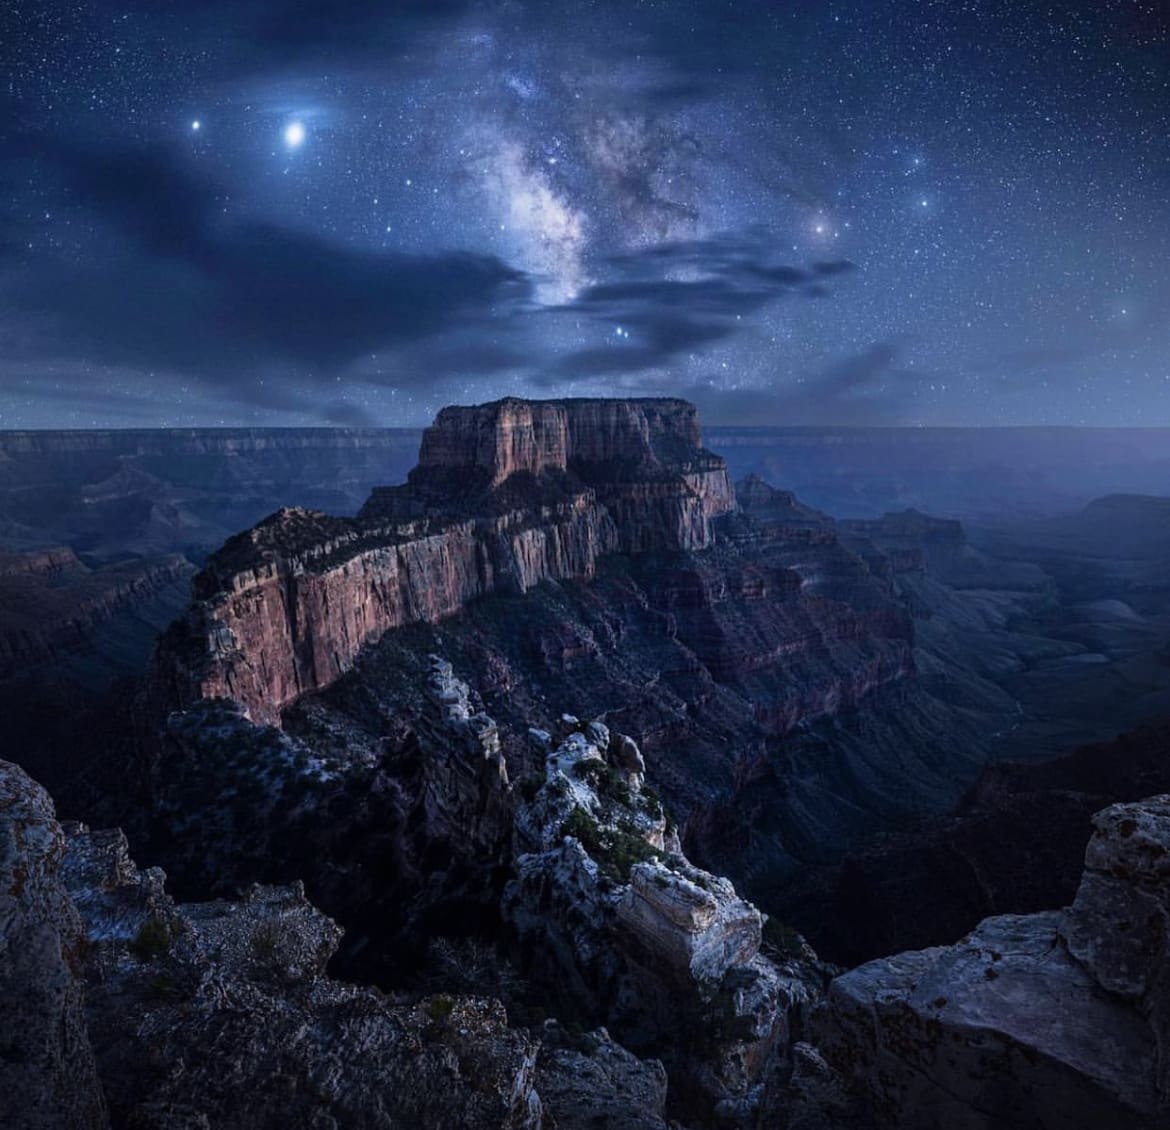 The Grand Canyon by night